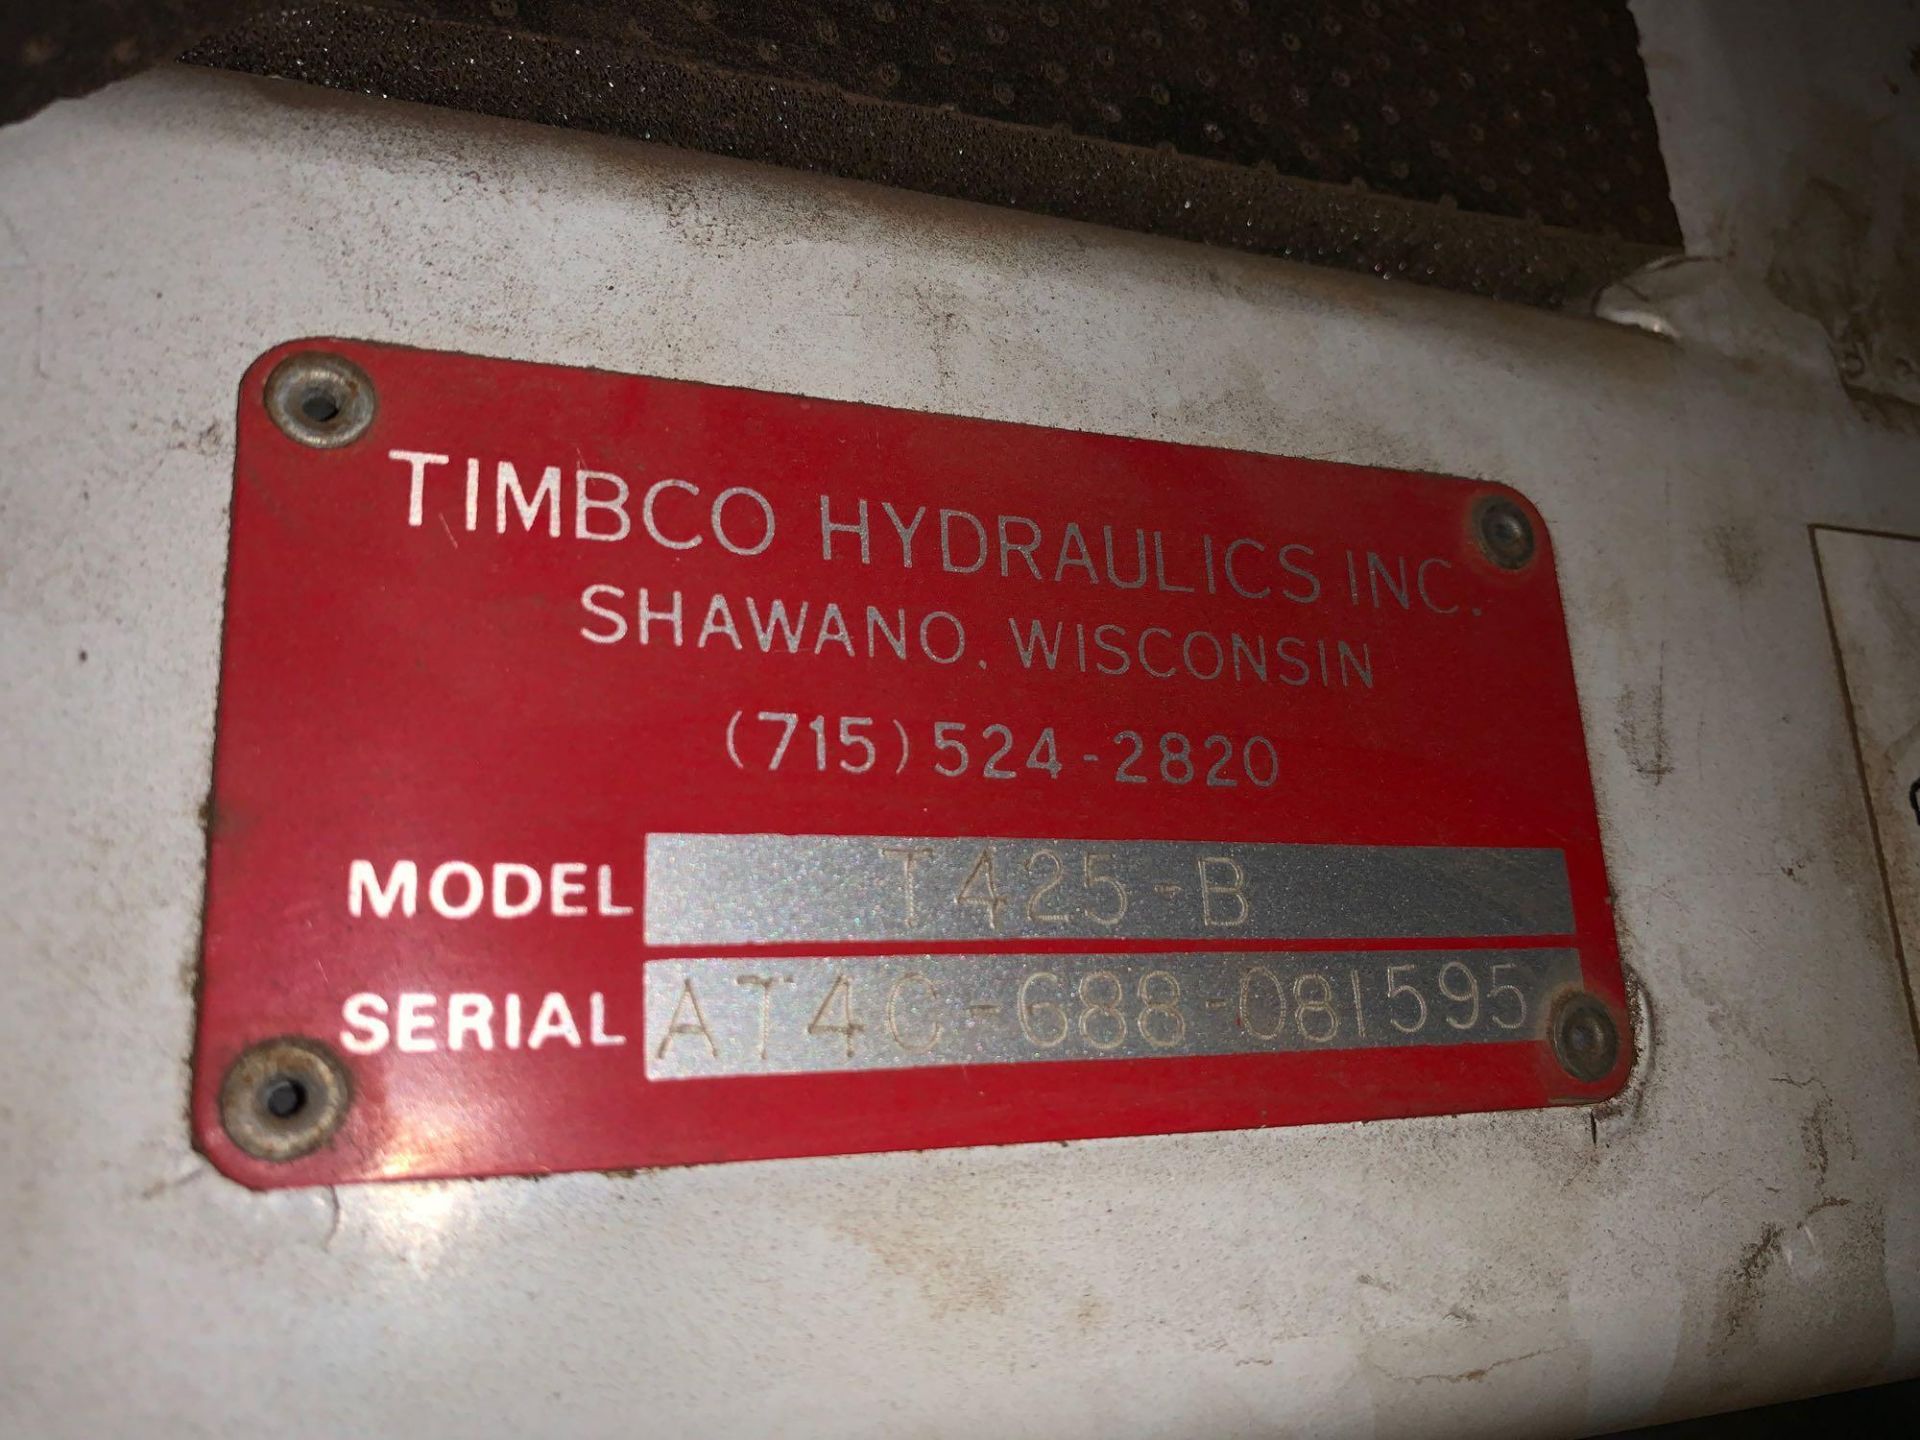 Timbco Hydraulics - Tracked Feller Hydro Buncher, Model T425-B, S/N AT4C-688-081595, 7596 HRS - Image 25 of 33